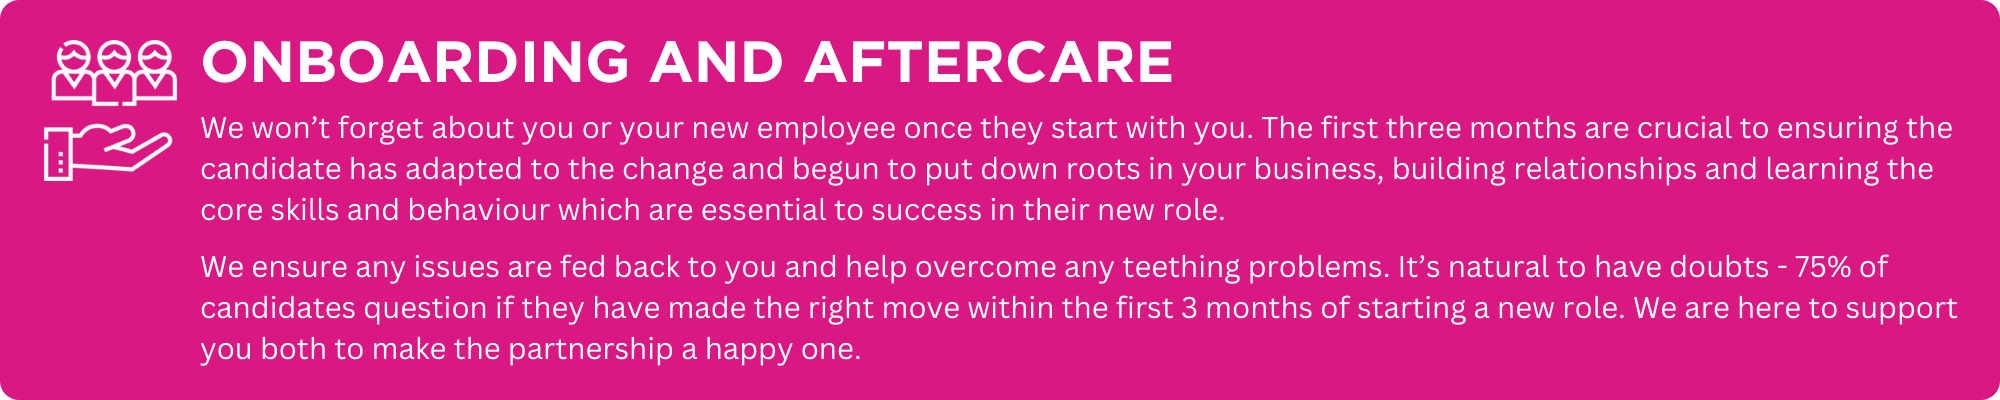 Onboarding and Aftercare